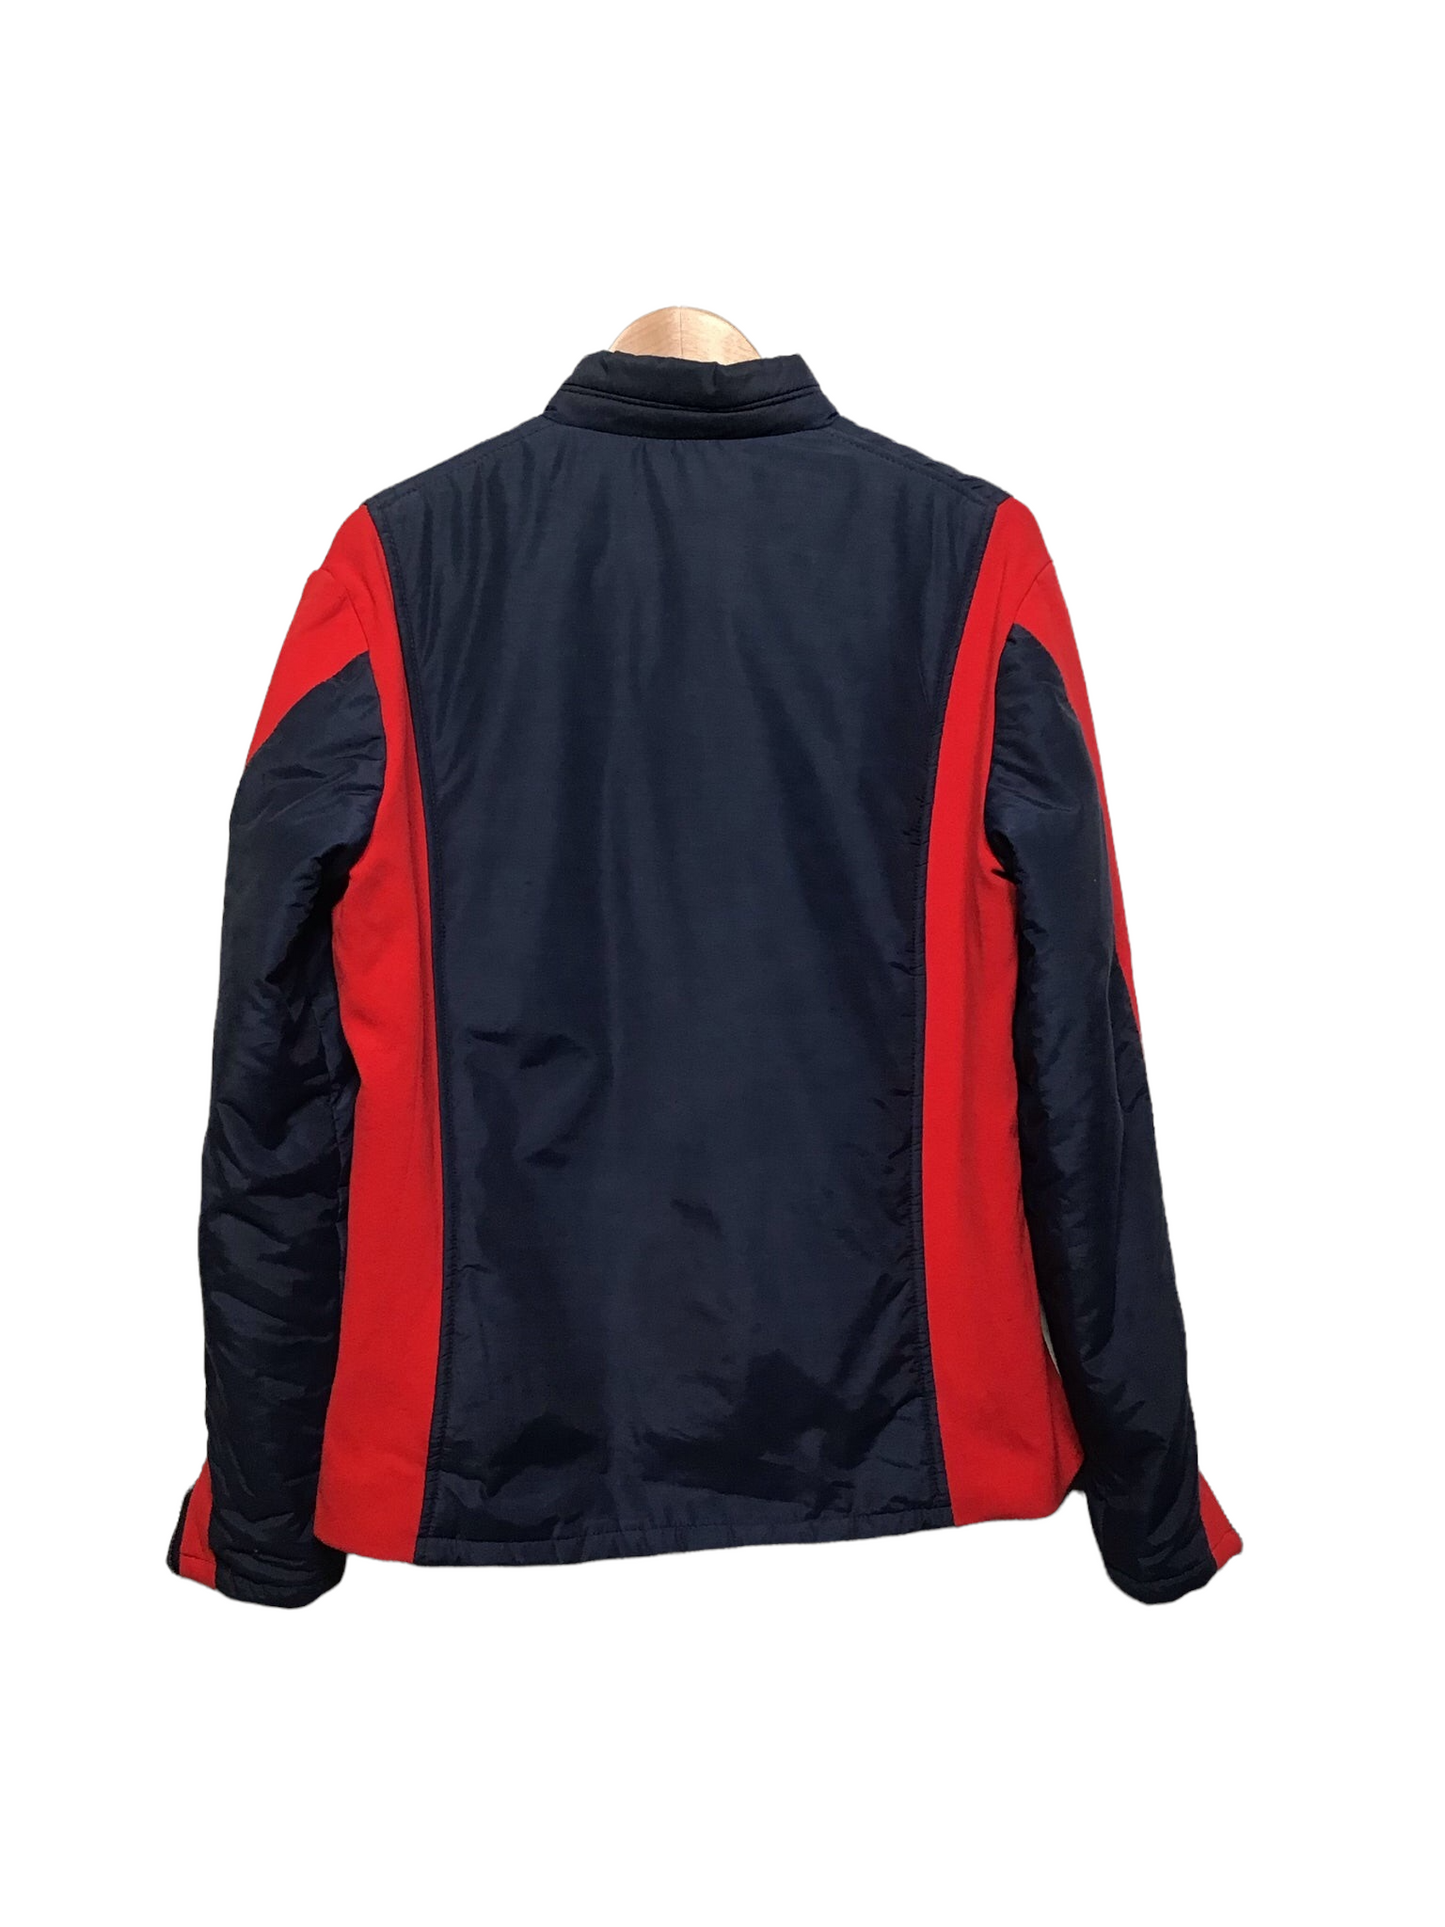 Navy and Red Sports Jacket (Size L)